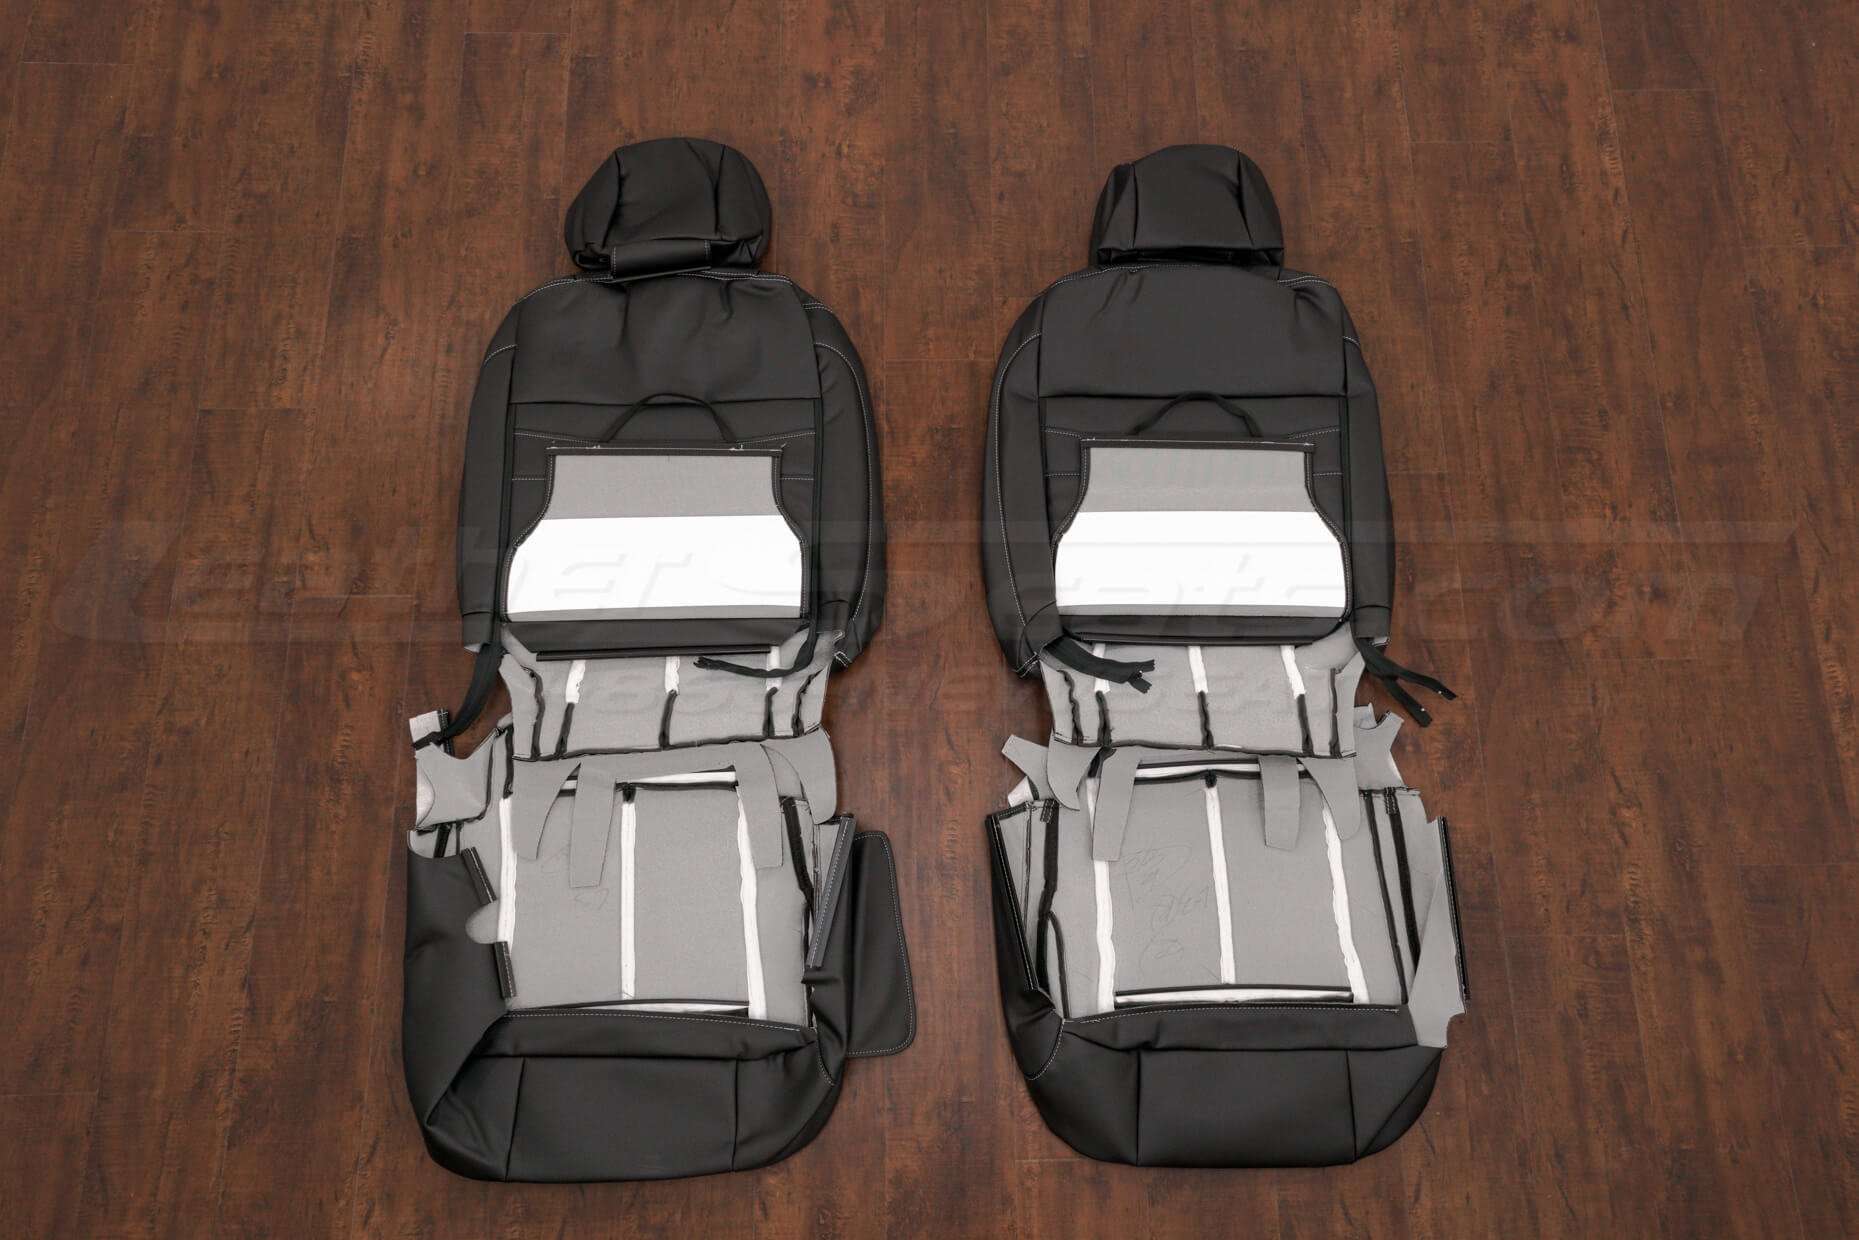 16-21 Nissan titan Leather Kit - Black - Rear view of front seats